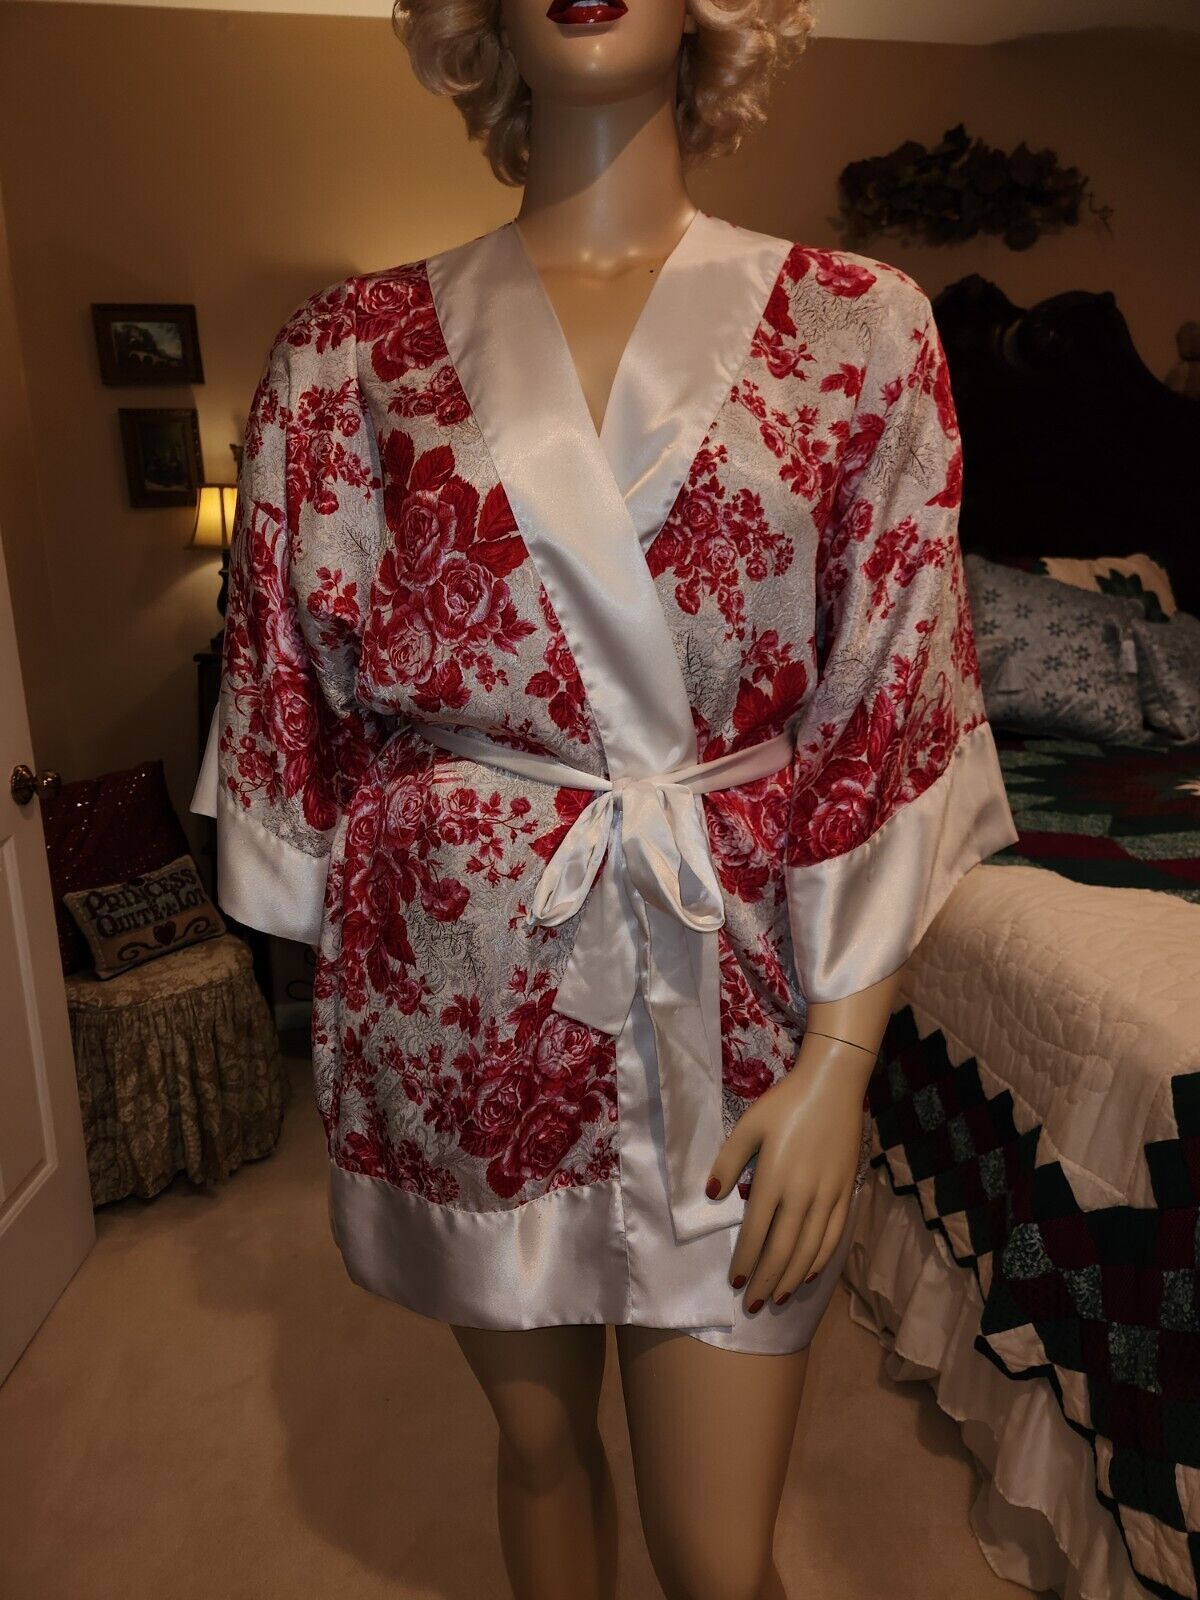 Primary image for Victoria's Secret Womens One Size Robe Vintage Gold Label Red Roses White Satin